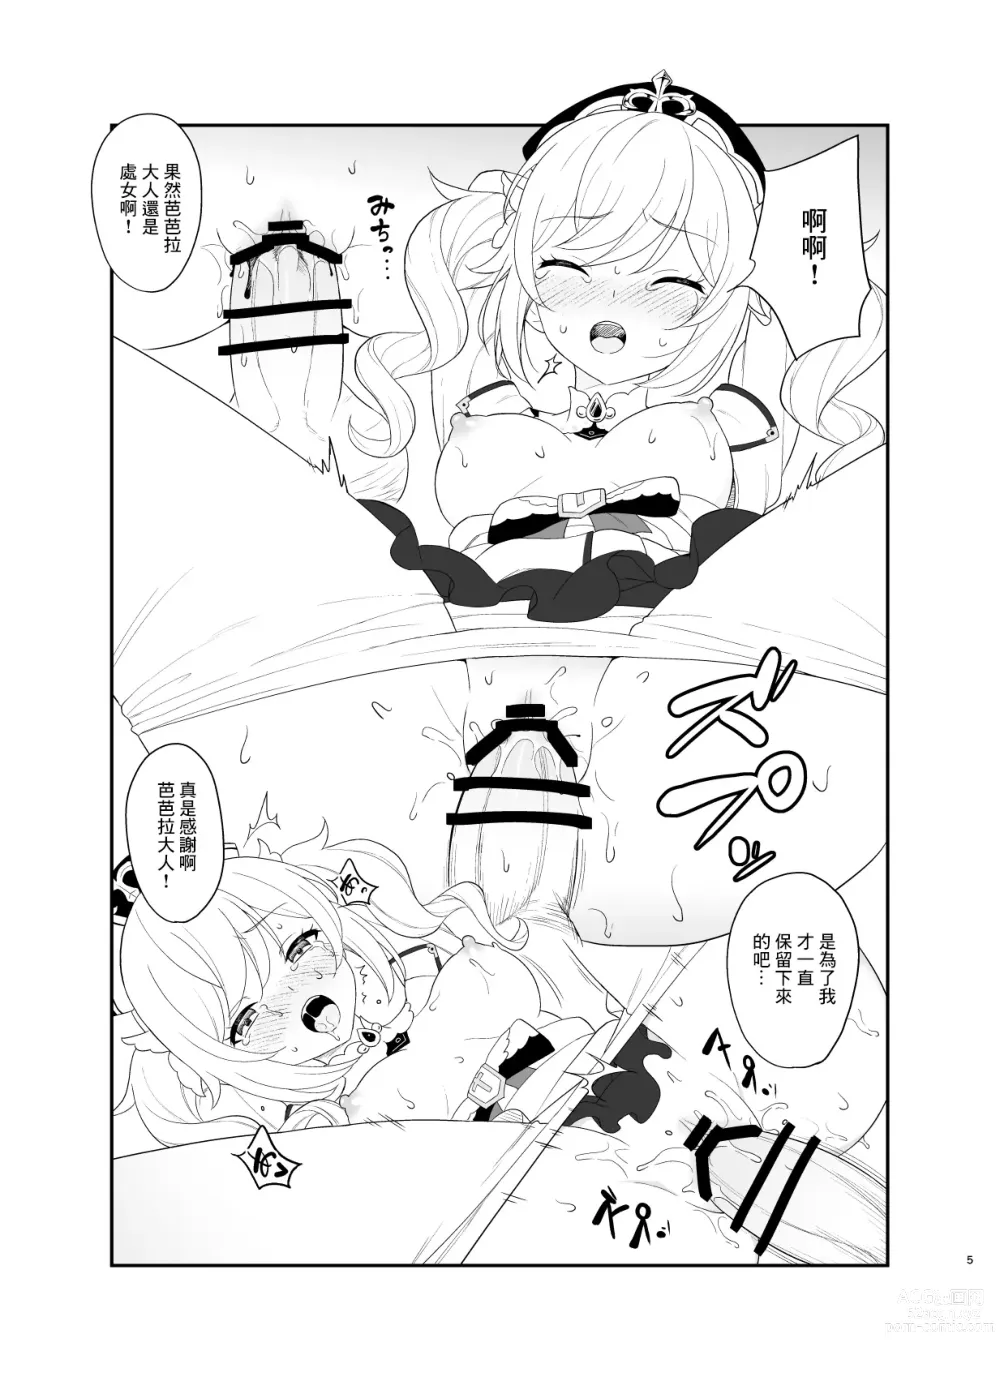 Page 4 of doujinshi 我的芭芭拉大人